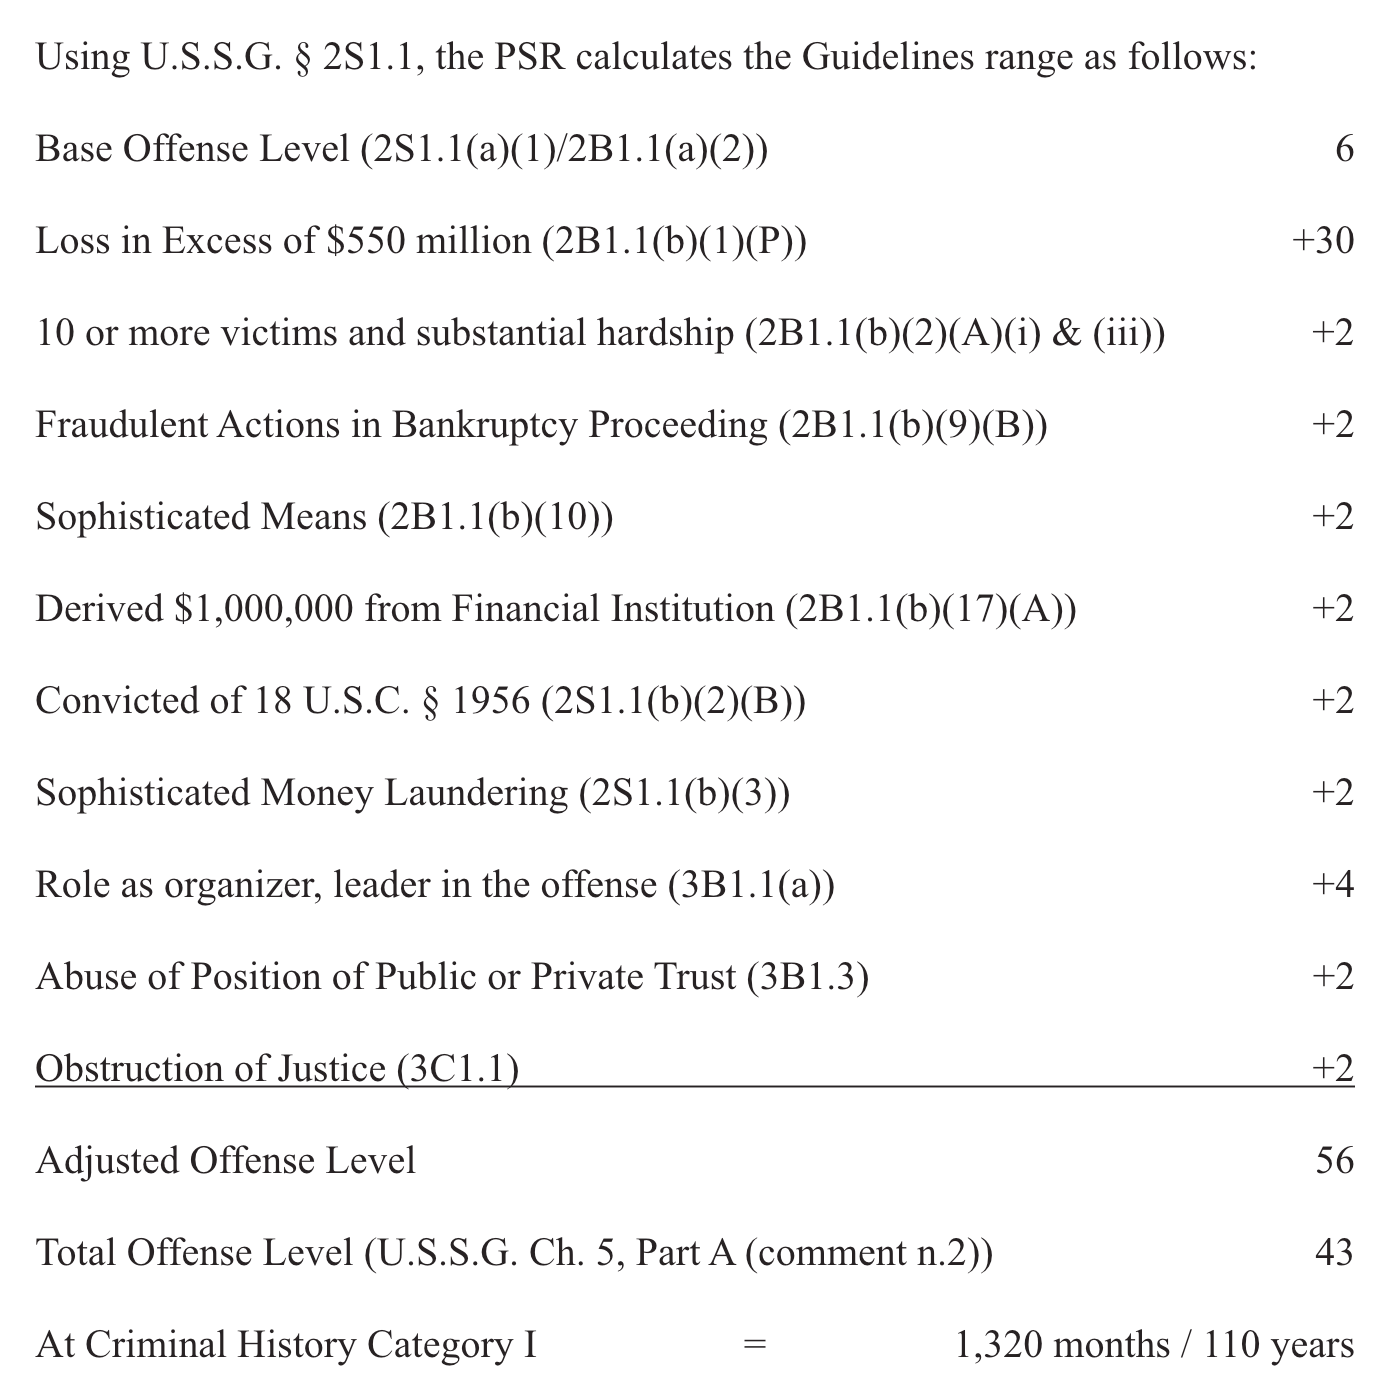 Using U.S.S.G. § 2S1.1, the PSR calculates the Guidelines range as follows: Base Offense Level (2S1.1(a)(1)/2B1.1(a)(2)) 6 Loss in Excess of $550 million (2B1.1(b)(1)(P)) +30 10 or more victims and substantial hardship (2B1.1(b)(2)(A)(i) & (iii)) +2 Fraudulent Actions in Bankruptcy Proceeding (2B1.1(b)(9)(B)) +2 Sophisticated Means (2B1.1(b)(10)) +2 Derived $1,000,000 from Financial Institution (2B1.1(b)(17)(A)) +2 Convicted of 18 U.S.C. § 1956 (2S1.1(b)(2)(B)) +2 Sophisticated Money Laundering (2S1.1(b)(3)) +2 Role as organizer, leader in the offense (3B1.1(a)) +4 Abuse of Position of Public or Private Trust (3B1.3) +2 Obstruction of Justice (3C1.1) +2 Adjusted Offense Level 56 Total Offense Level (U.S.S.G. Ch. 5, Part A (comment n.2)) 43 At Criminal History Category I = 1,320 months / 110 years